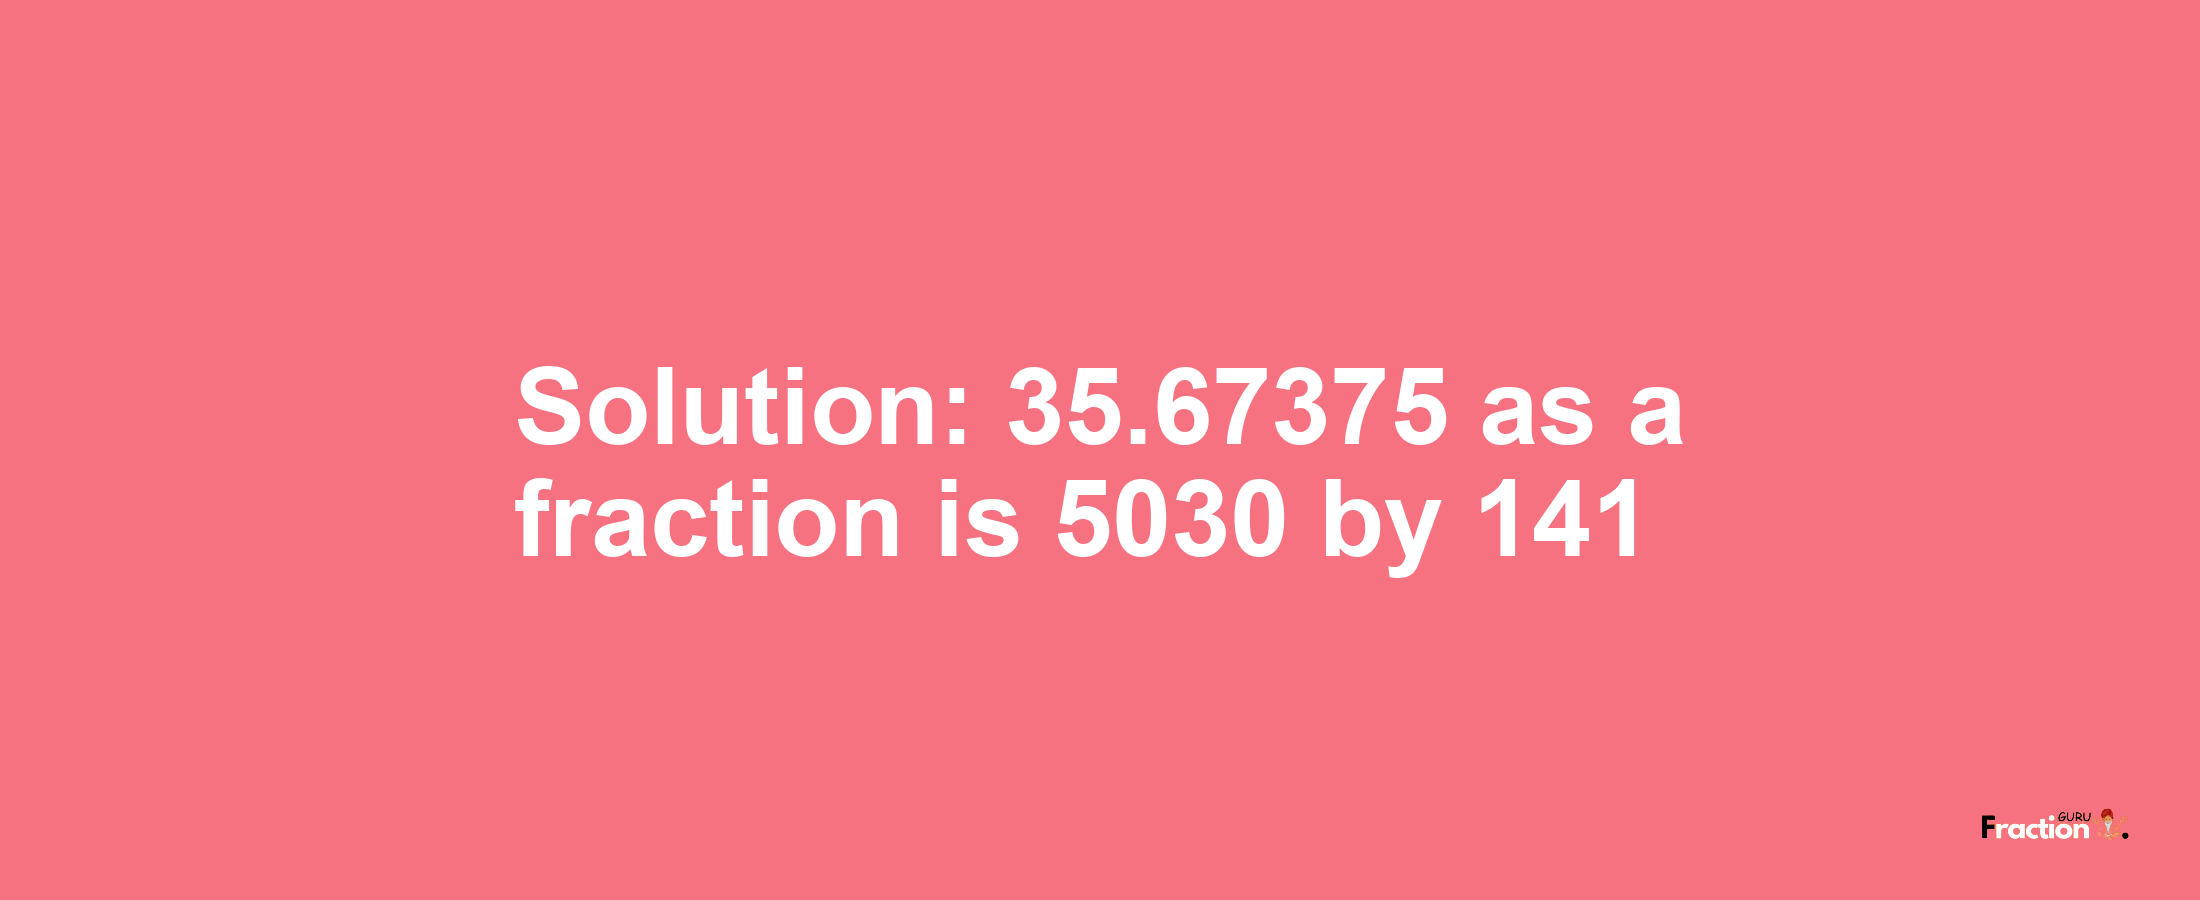 Solution:35.67375 as a fraction is 5030/141